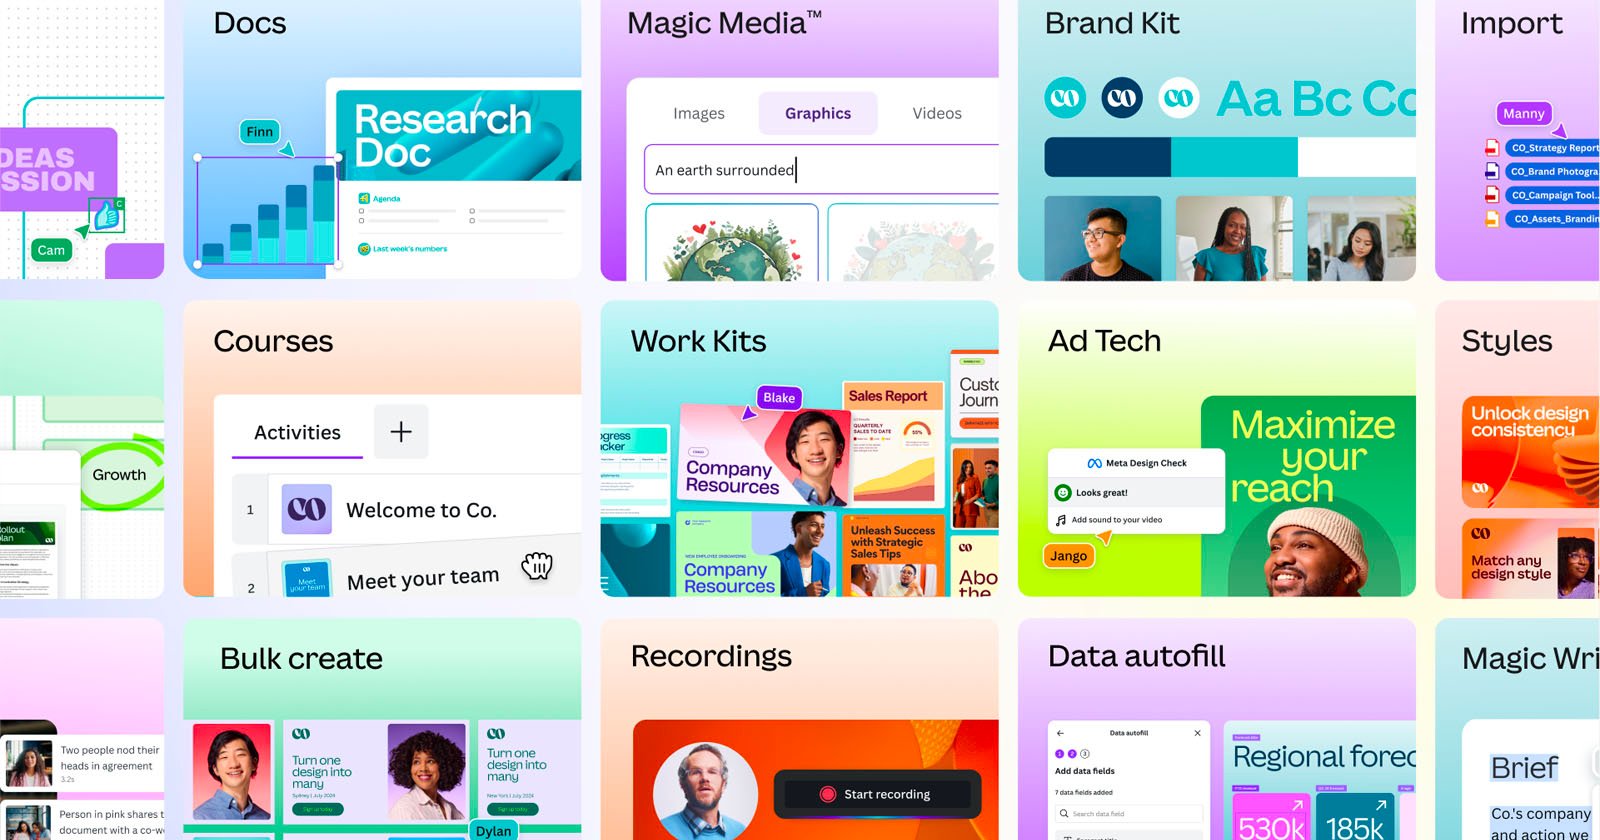 A collage of various software applications and features, including Docs, Research Doc, Magic Media, Brand Kit, Courses, Work Kits, Ad Tech, and more. Each application is represented by a colorful thumbnail image showcasing its interface and key functions.